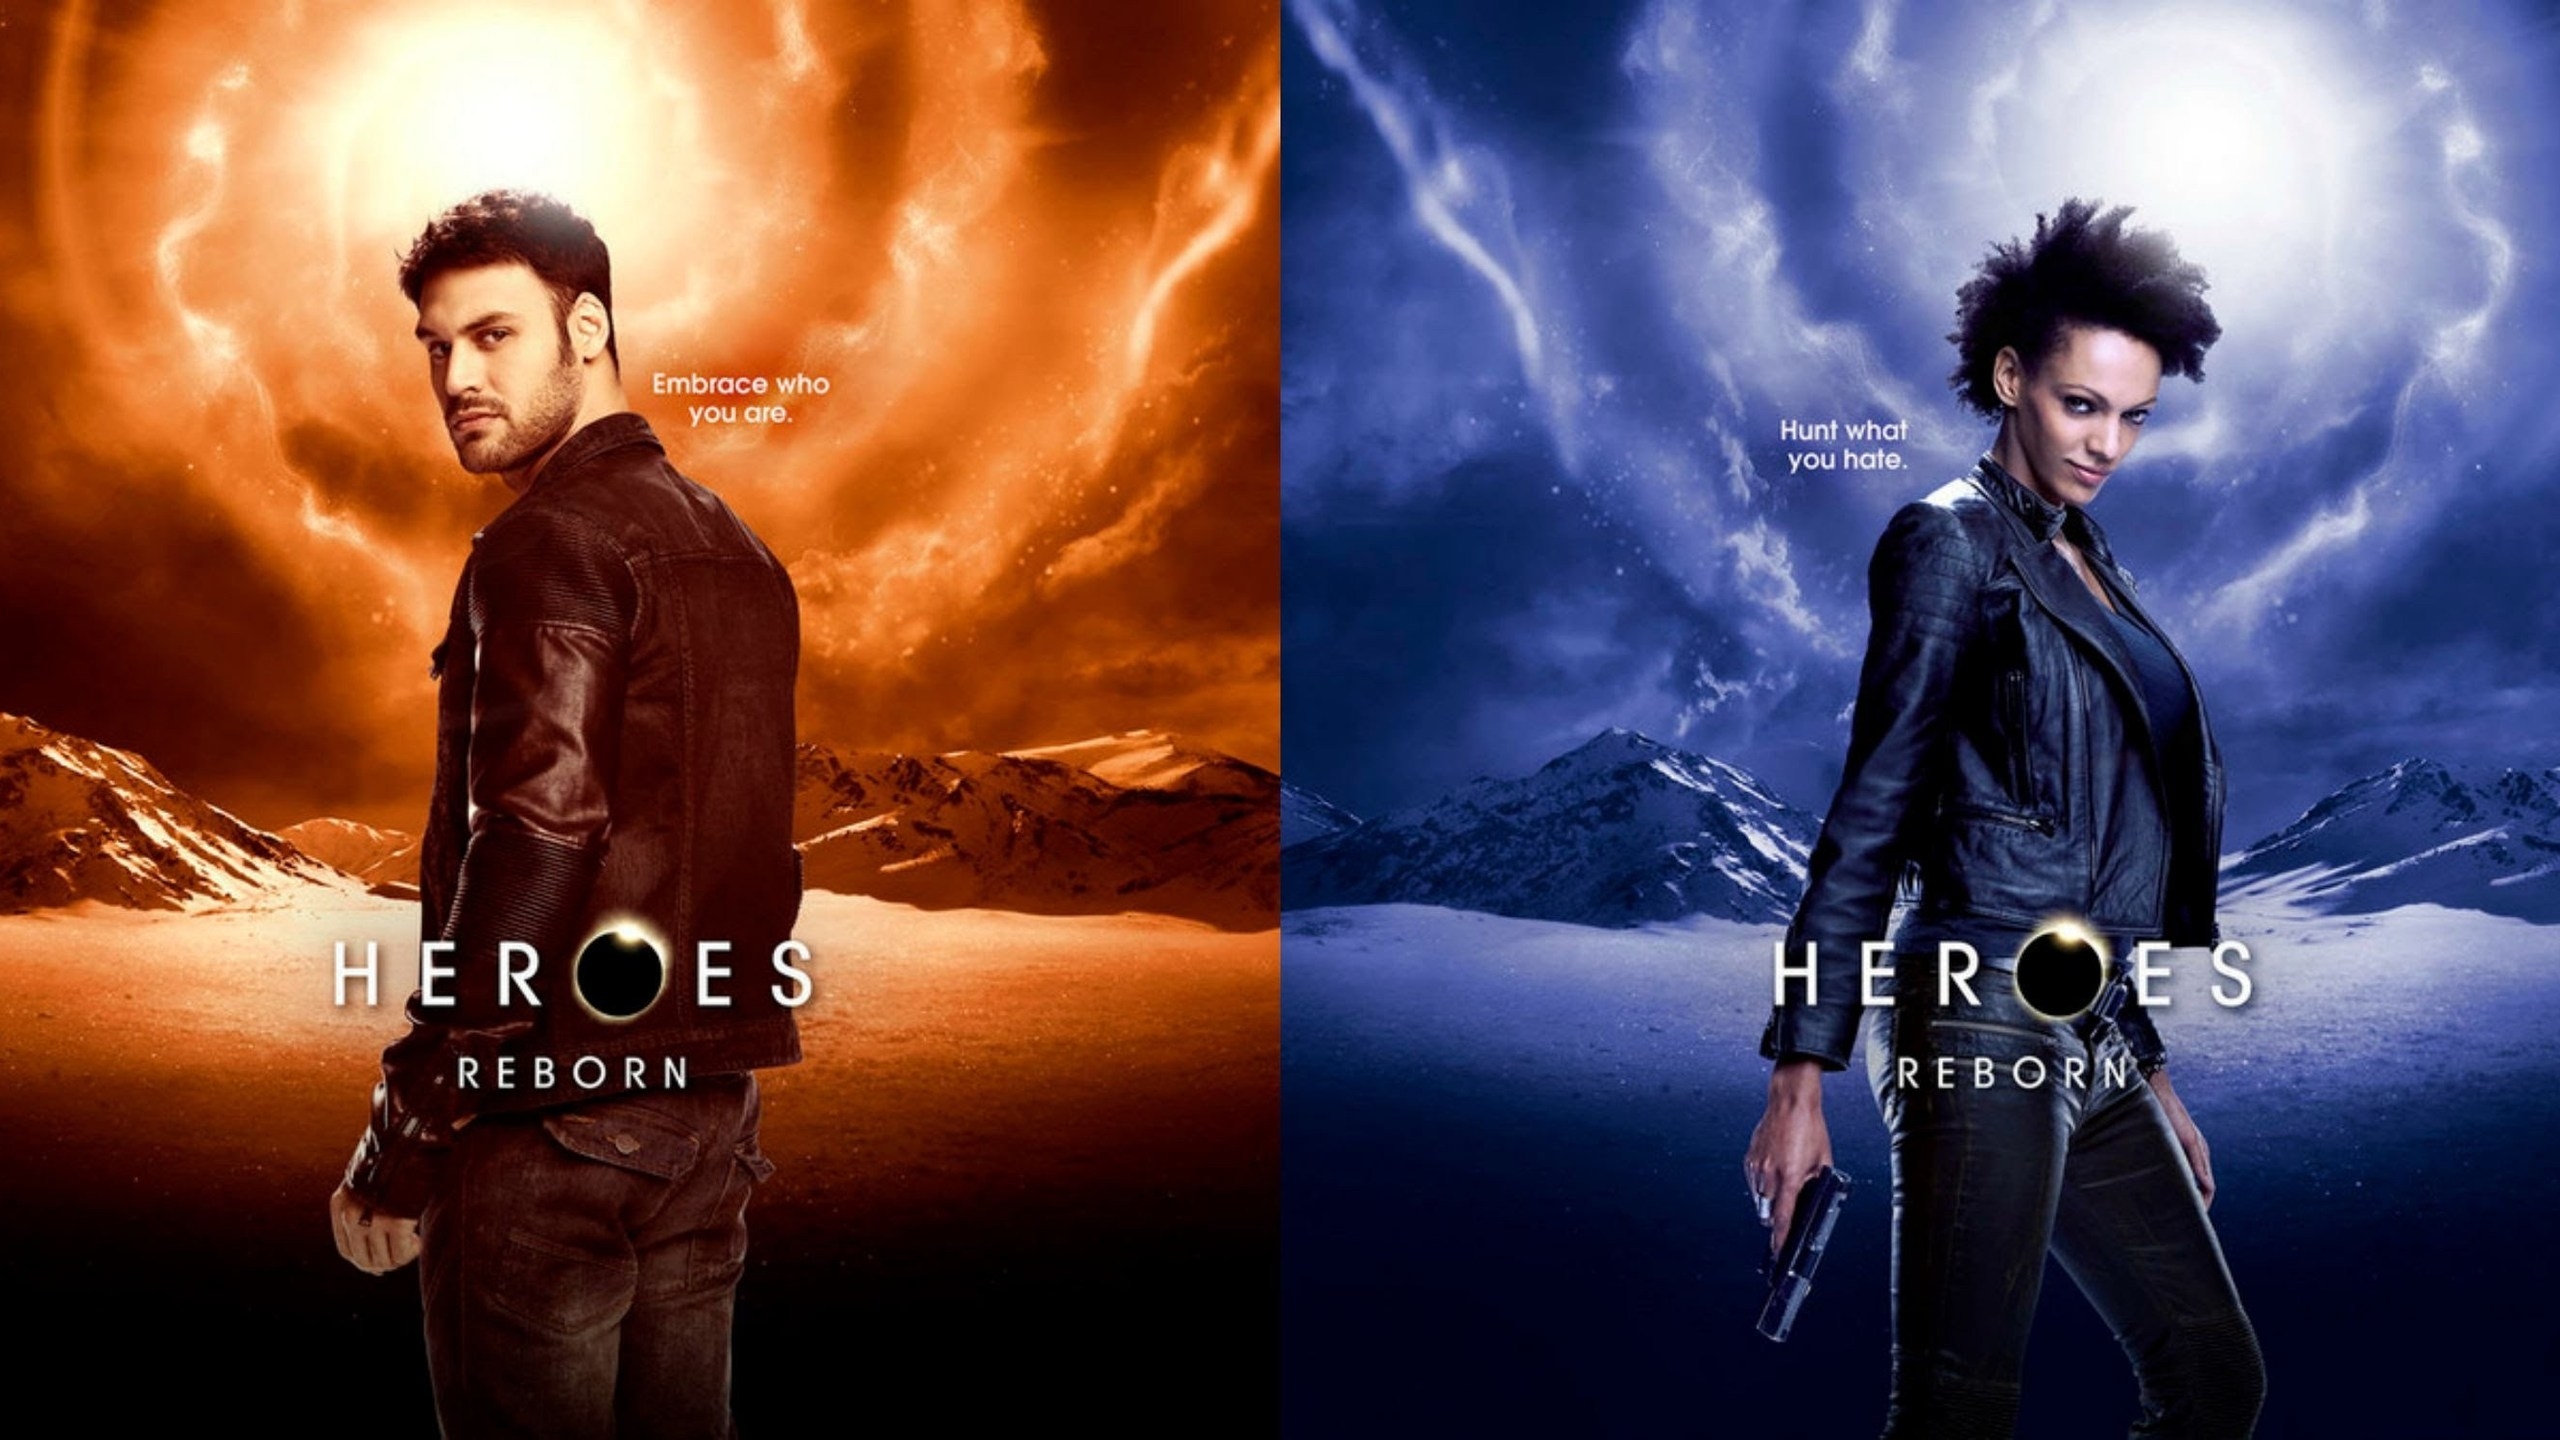 Heroes Reborn Carlos Gutierrez and Joanne Collins for 2560x1440 HDTV resolution